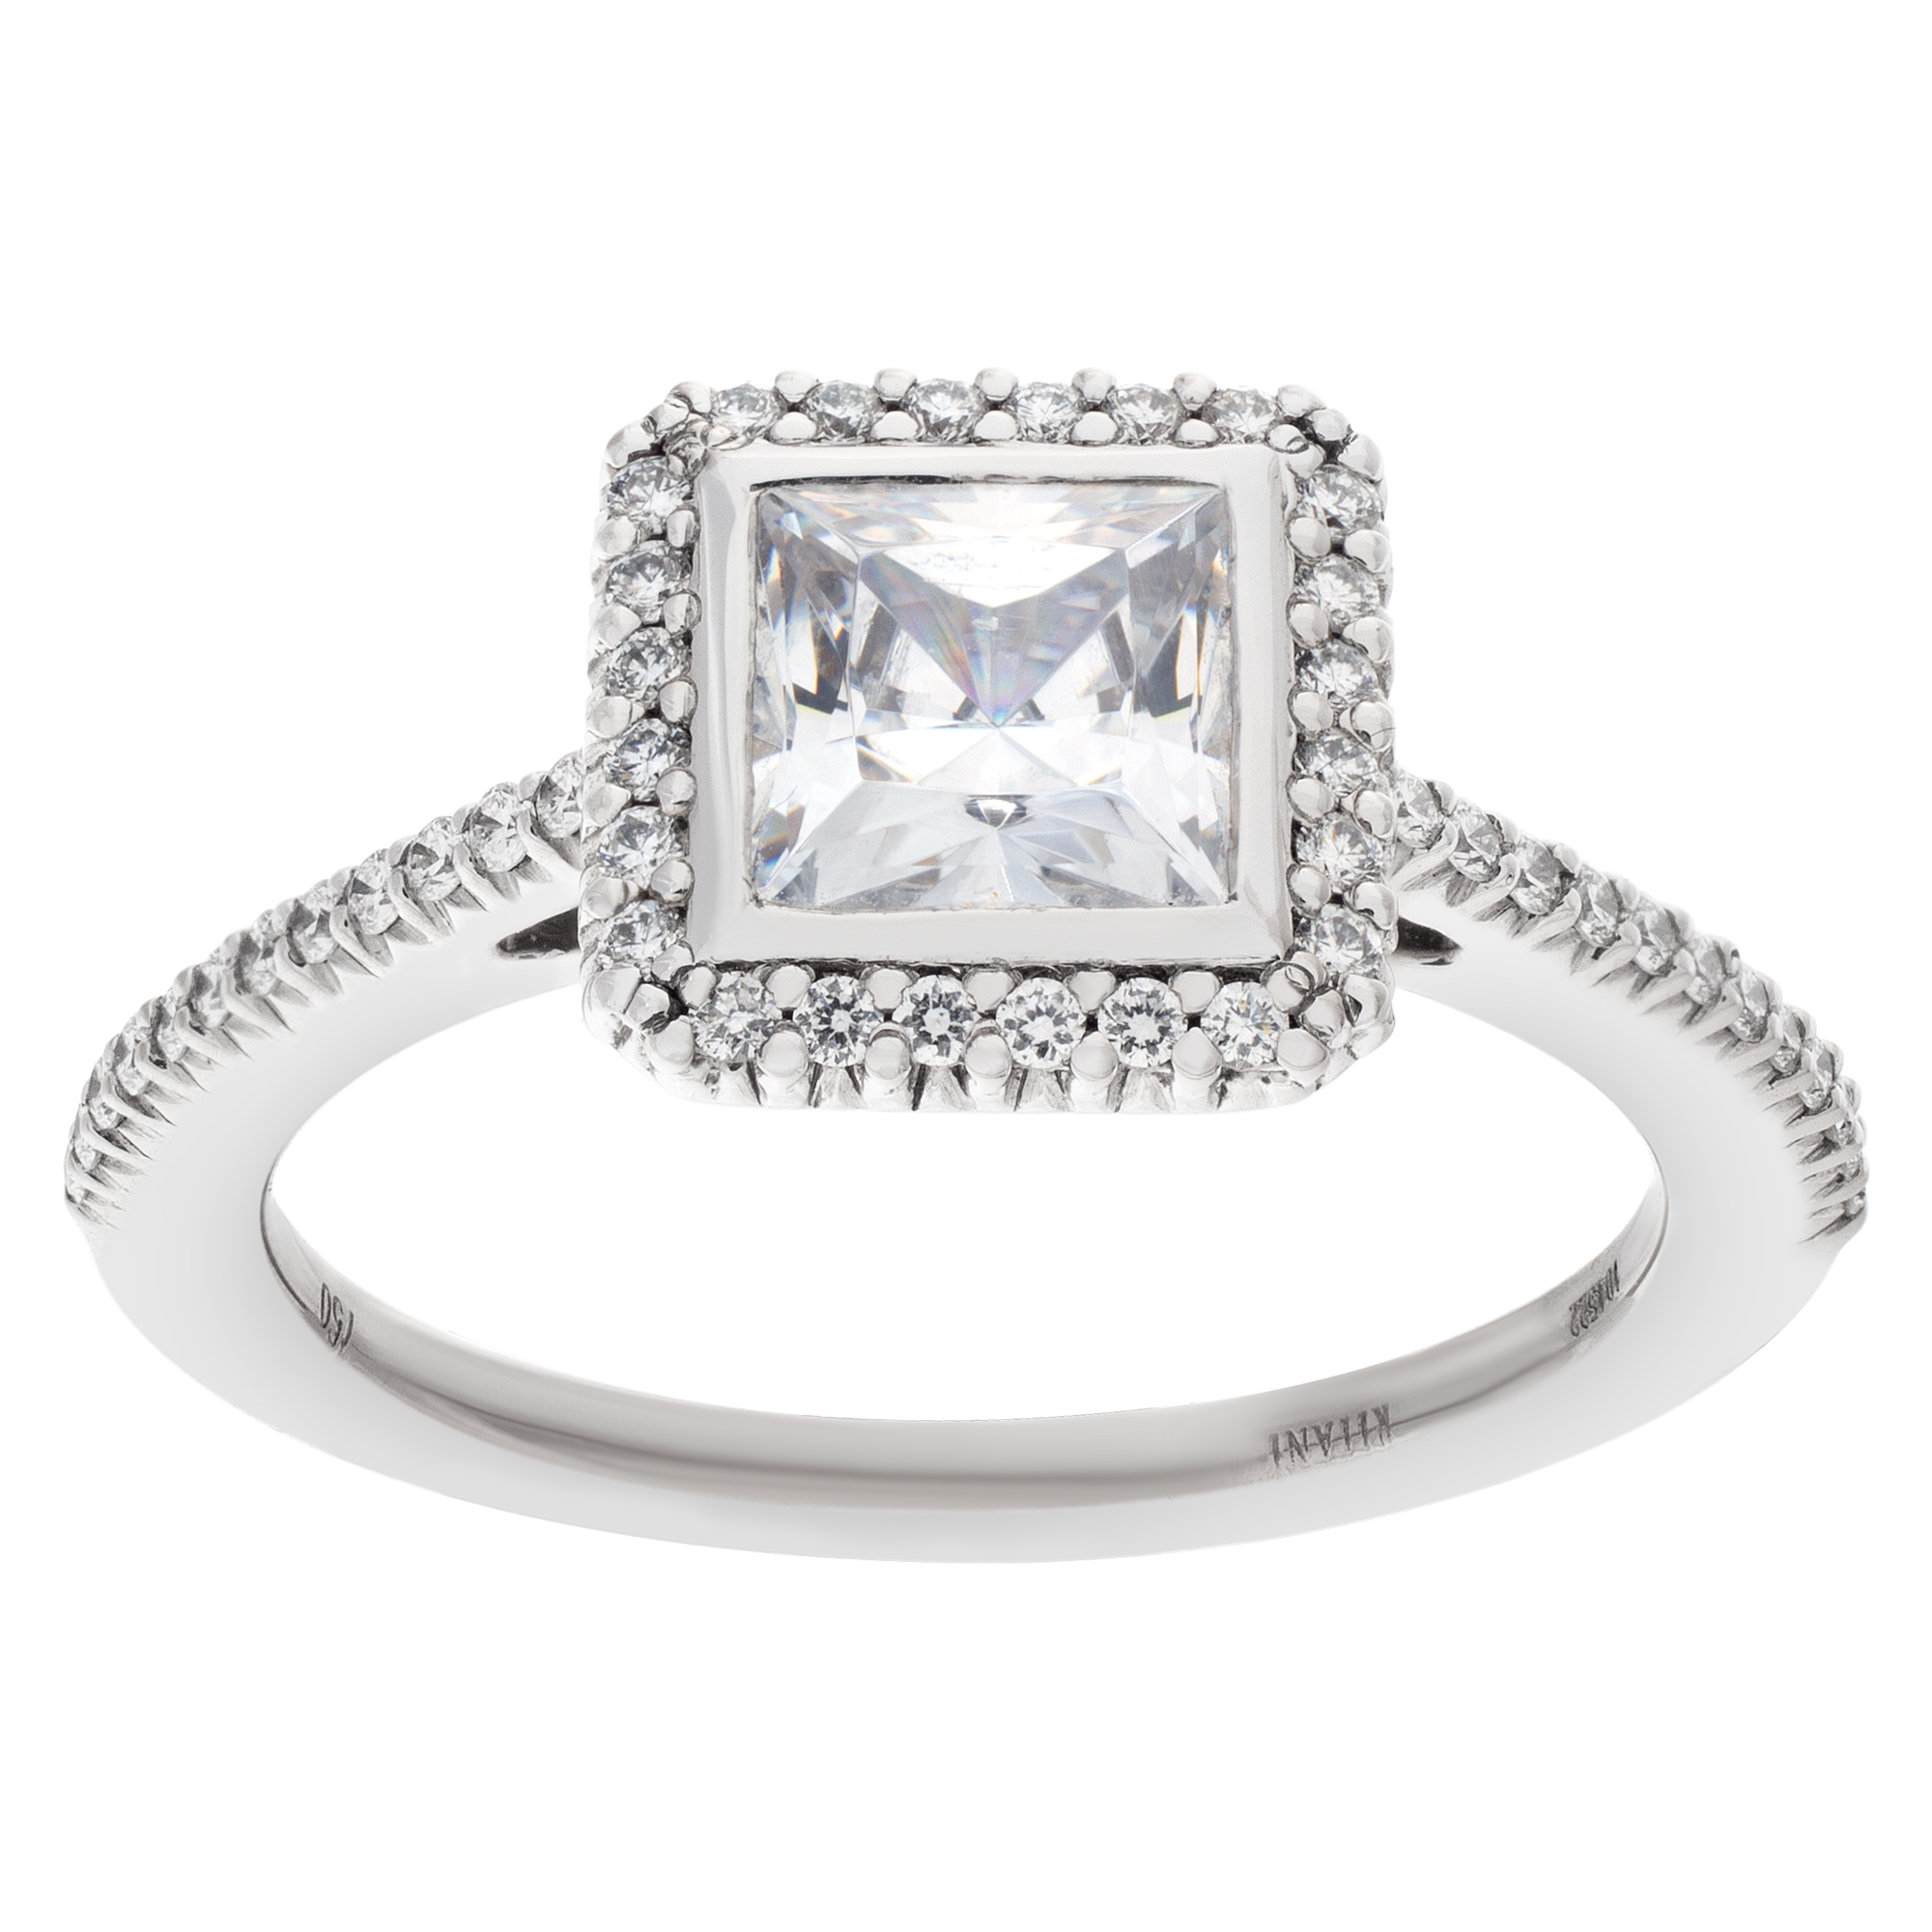 Ritani semi-mount in 18K white gold, with 0.24 carat round damonds to hold 1.0 ct princess cut center stone- Shown with CZ center- Not a Diamond